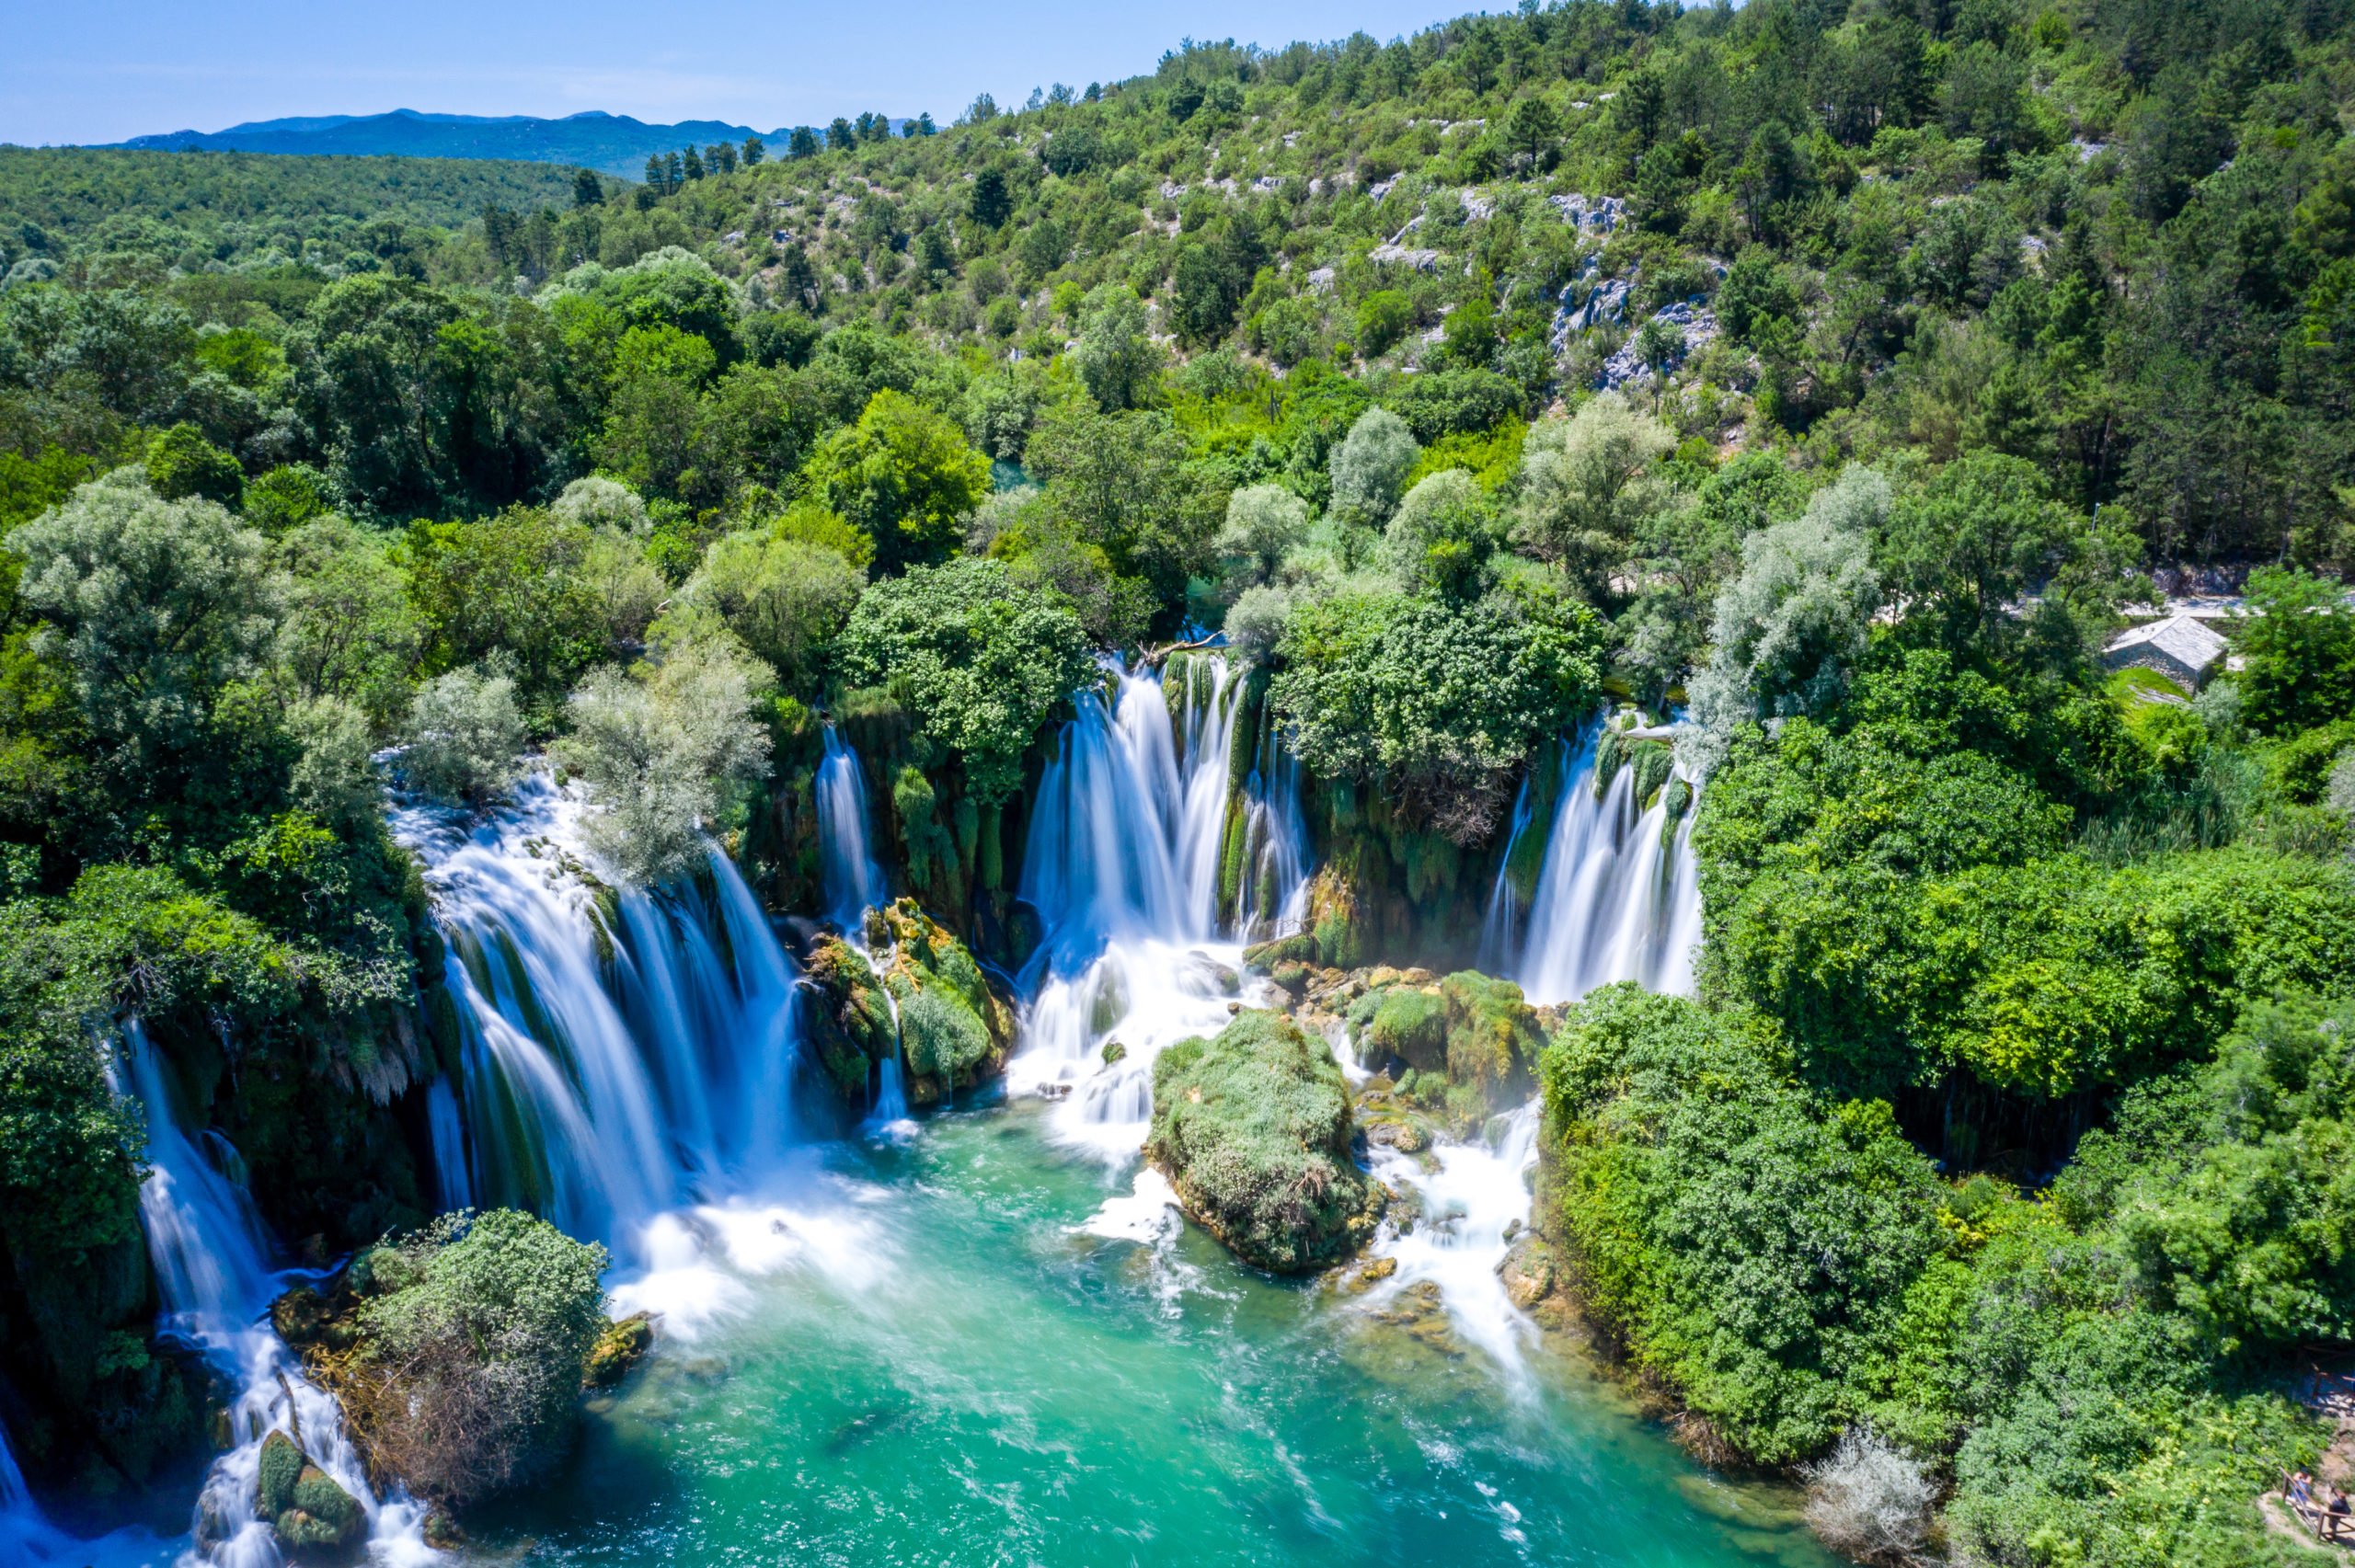 Discover The Kravice Waterfalls On The Mostar And Kravice Tour From Dubrovnik